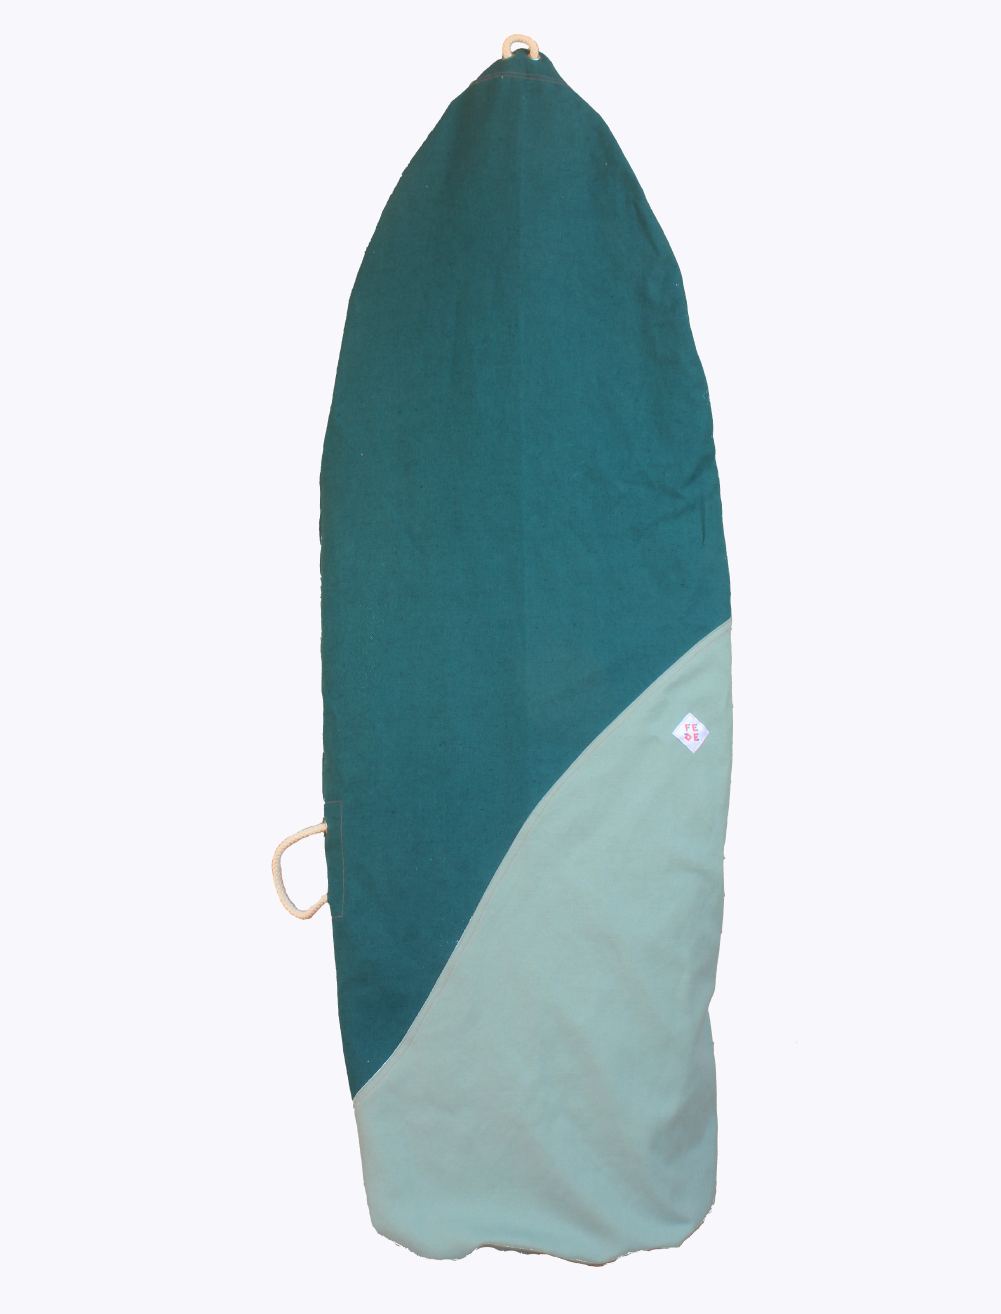 Sustainable and made to order canvas surfbag - Made to last surfboard bag